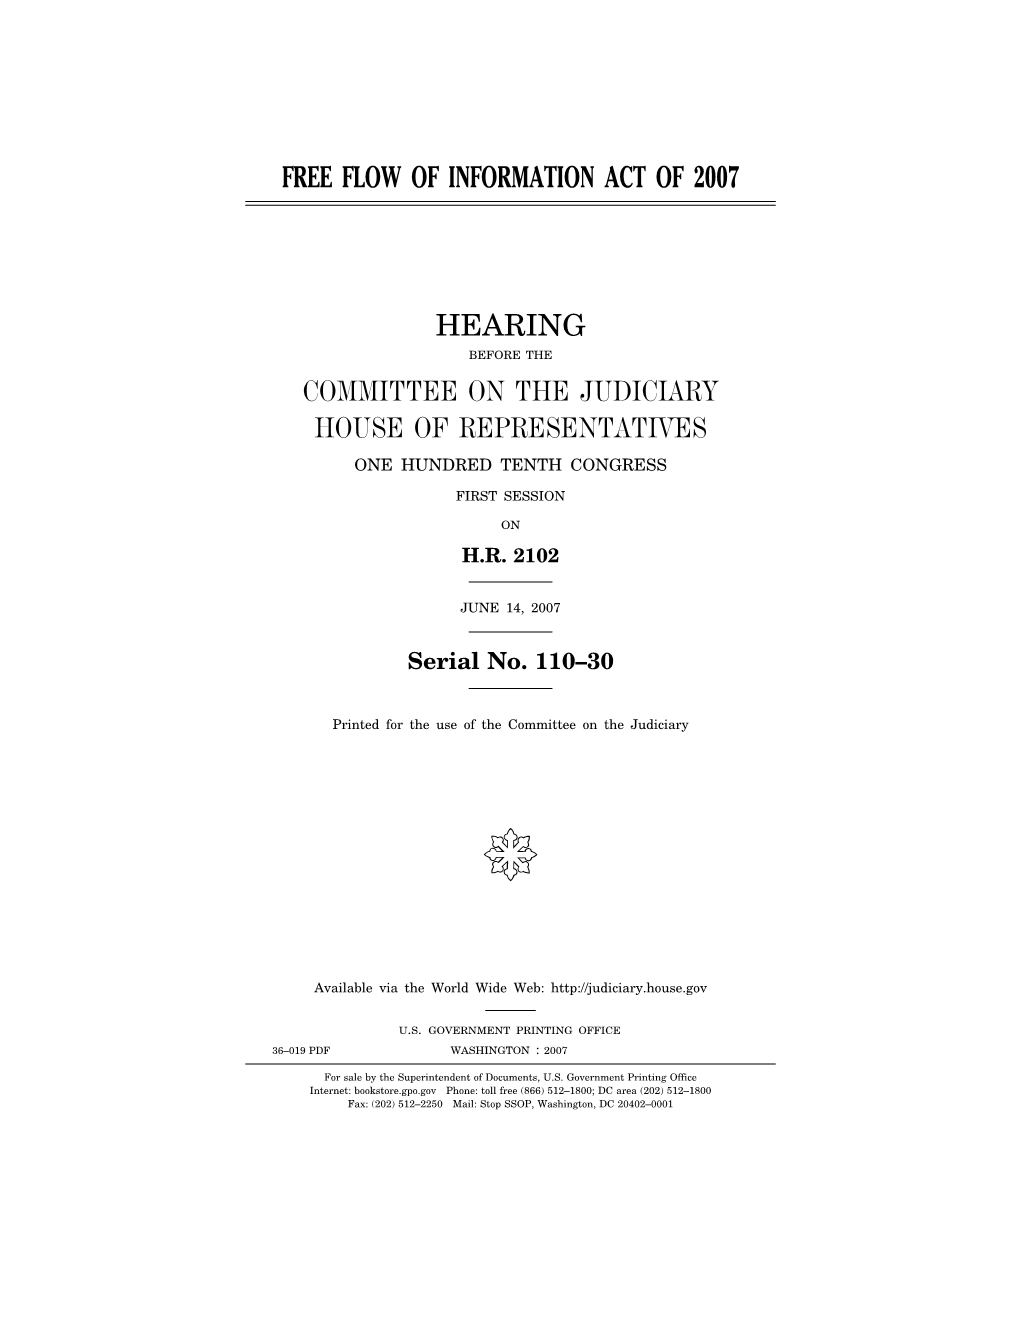 Free Flow of Information Act of 2007